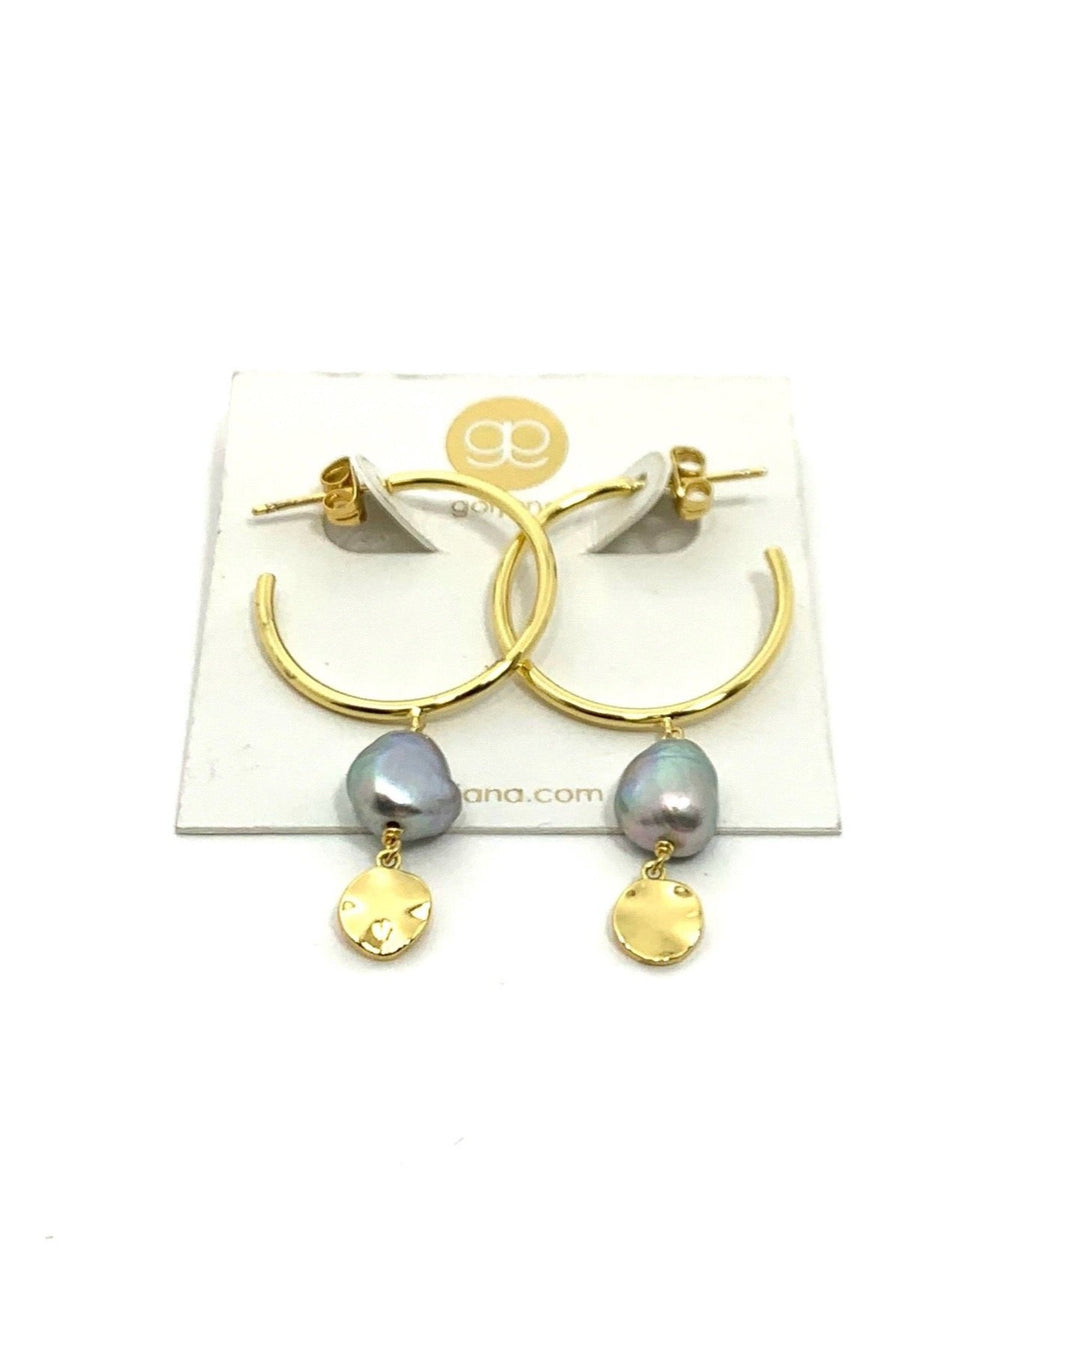 Gold Drop Stone and Charm Hoops